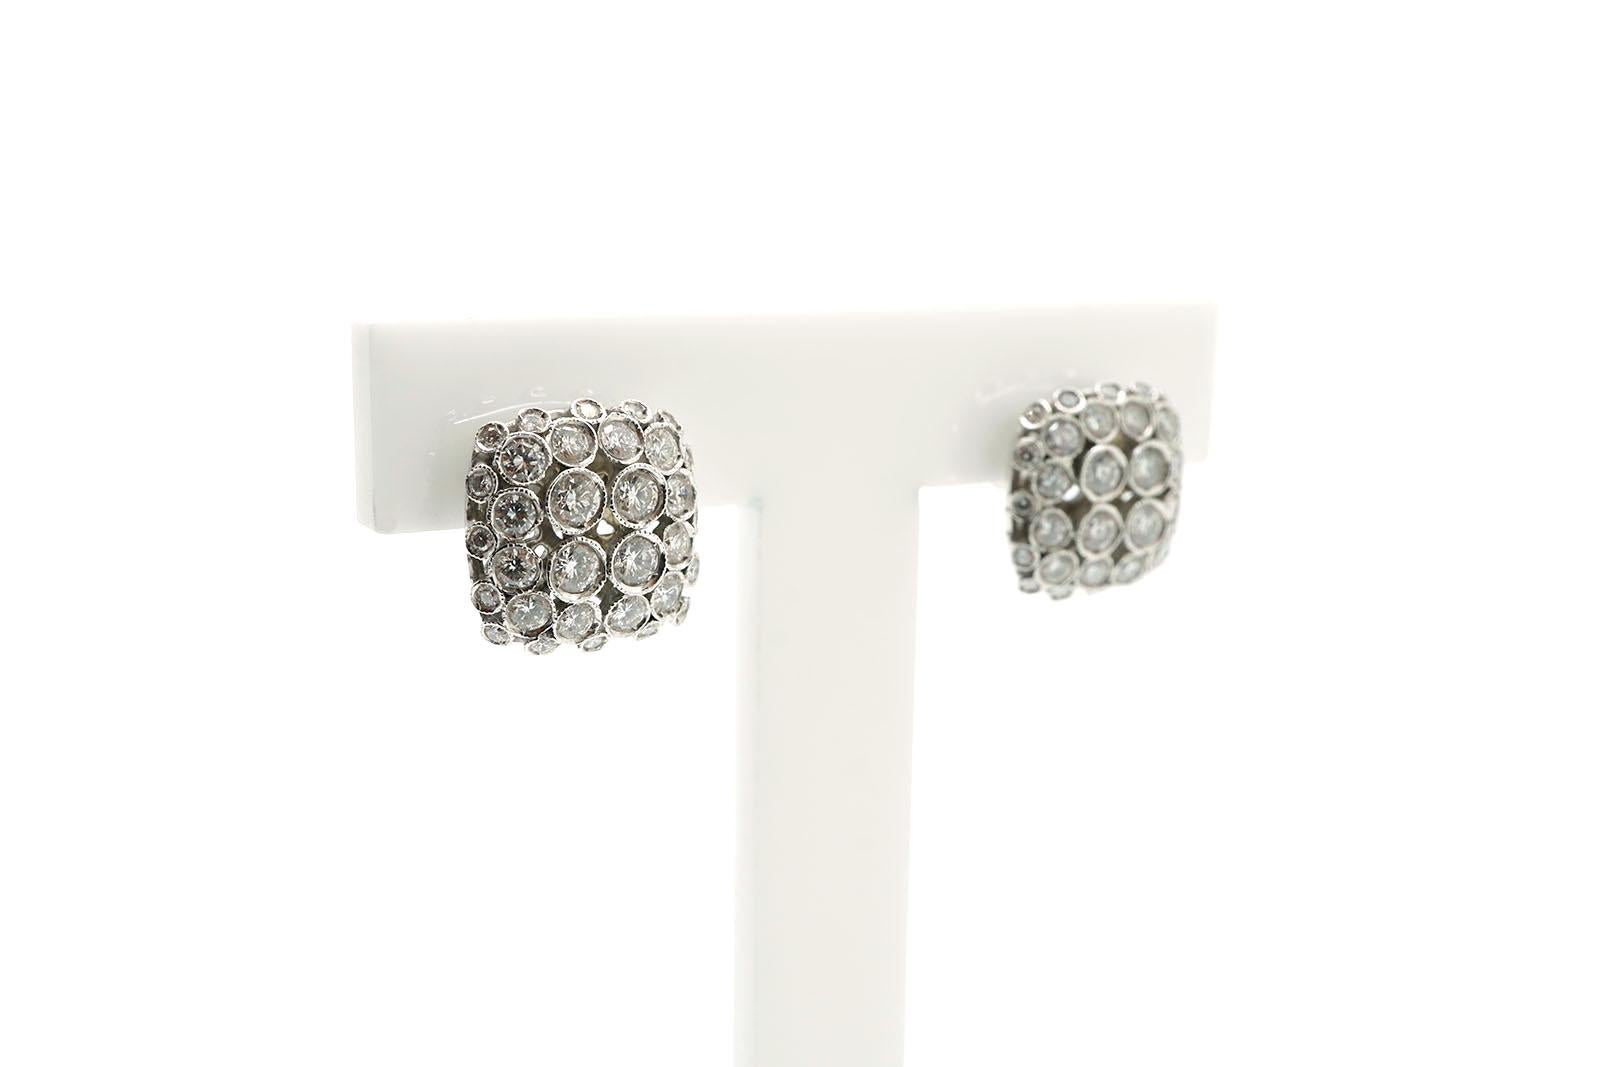 Square shape Art Decò style earrings.
Made in 18 Kt white gold for gr. 4.80 and Diamonds for ct 1.05.
Butterfly closure.
Measures cm 1.00 x 1.00 circa.
Made in Italy.